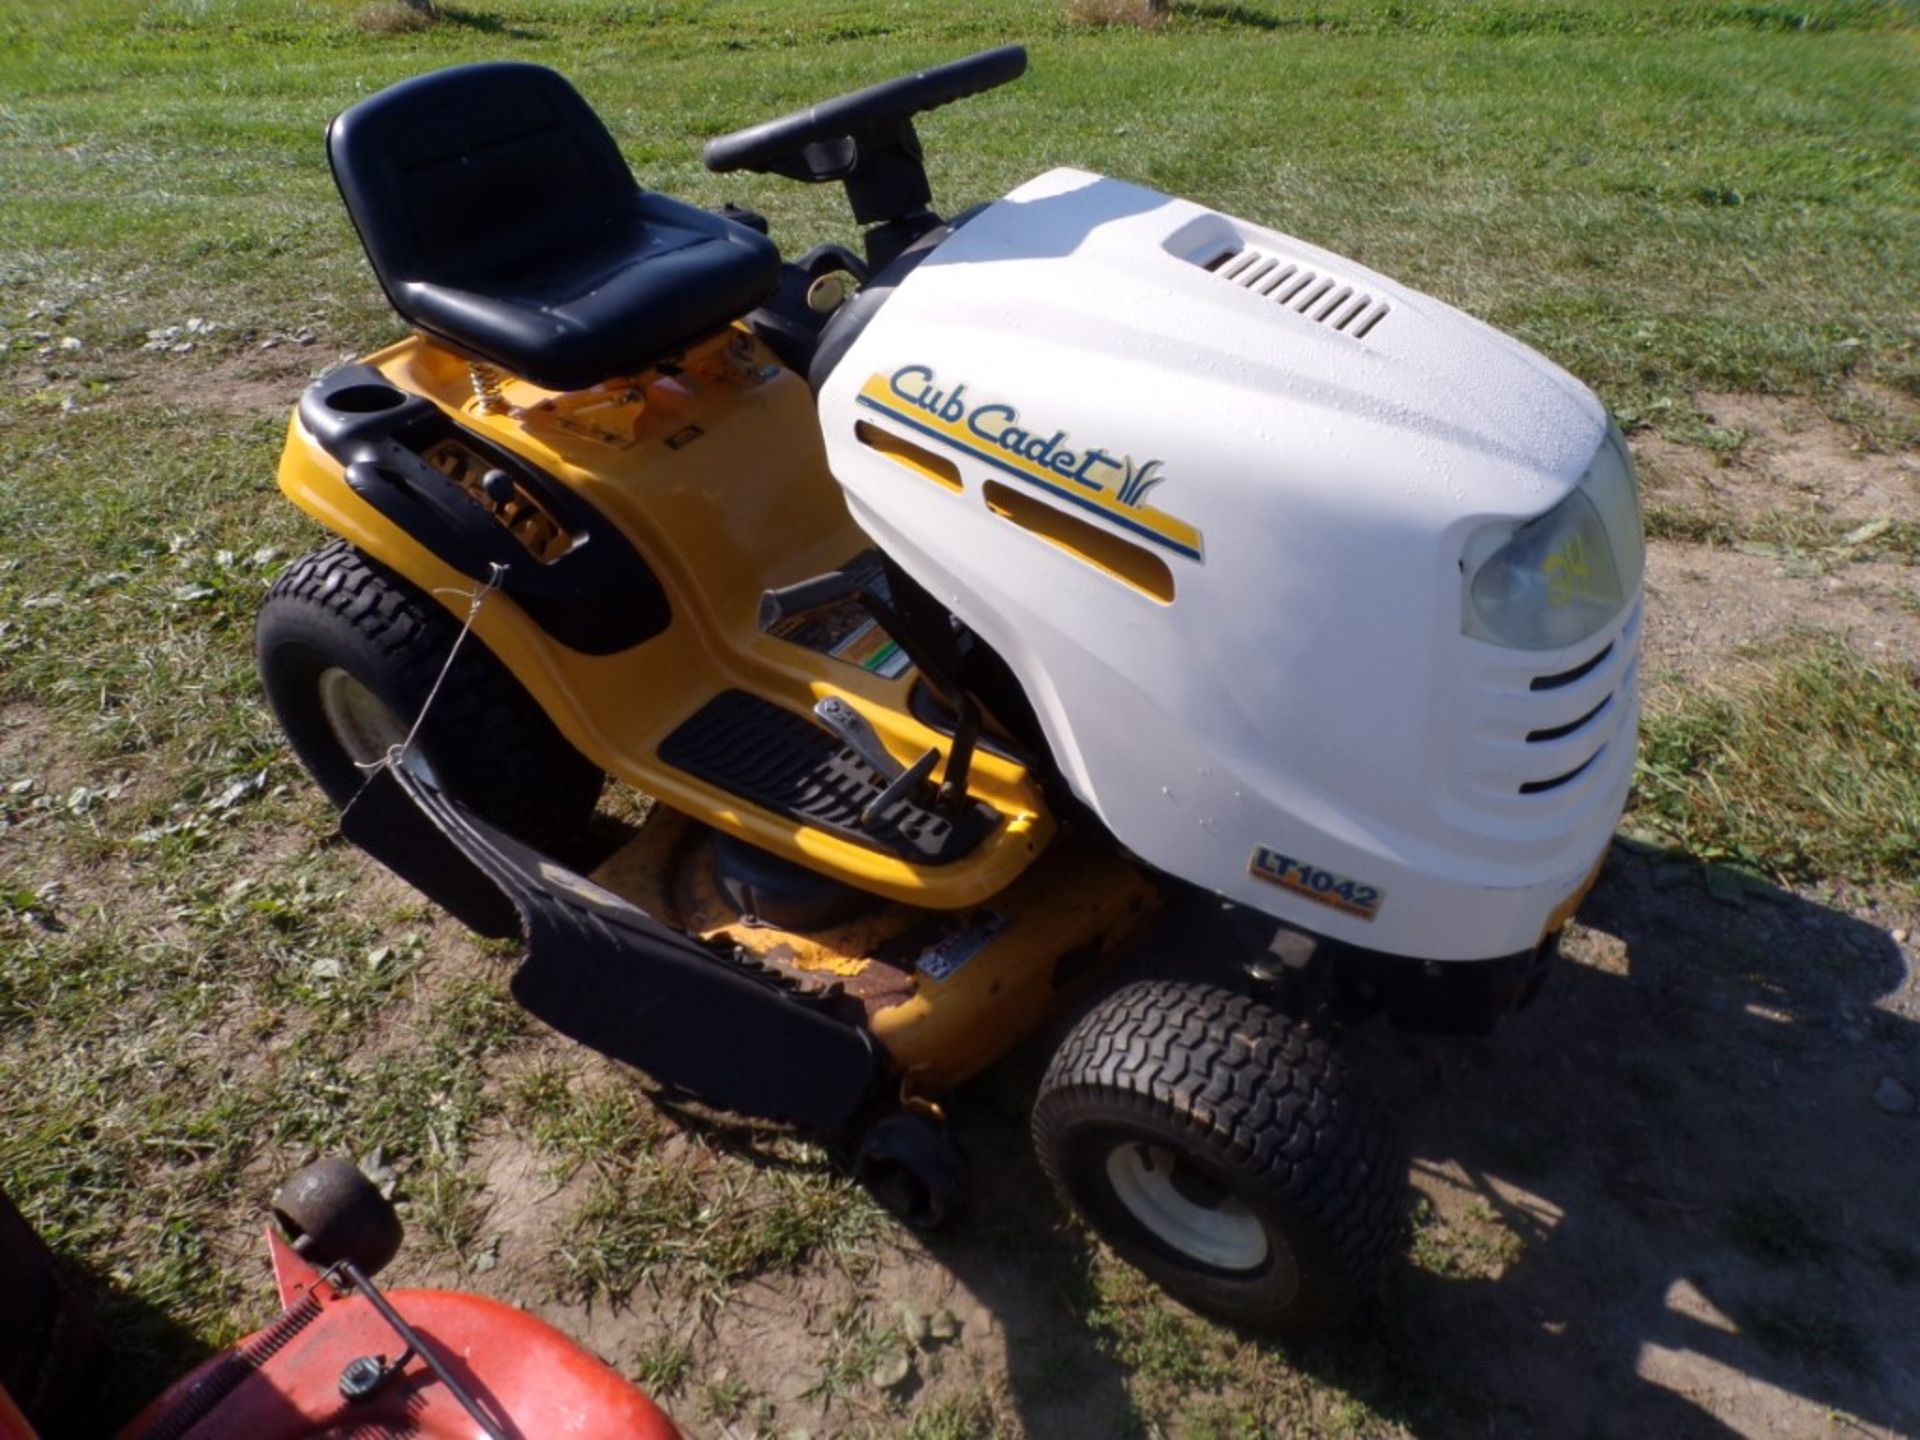 Cub Cadet LT 1042, Hydro Drive with 46'' Deck, 235 Hrs, SN H20006? (5823) - Image 2 of 2